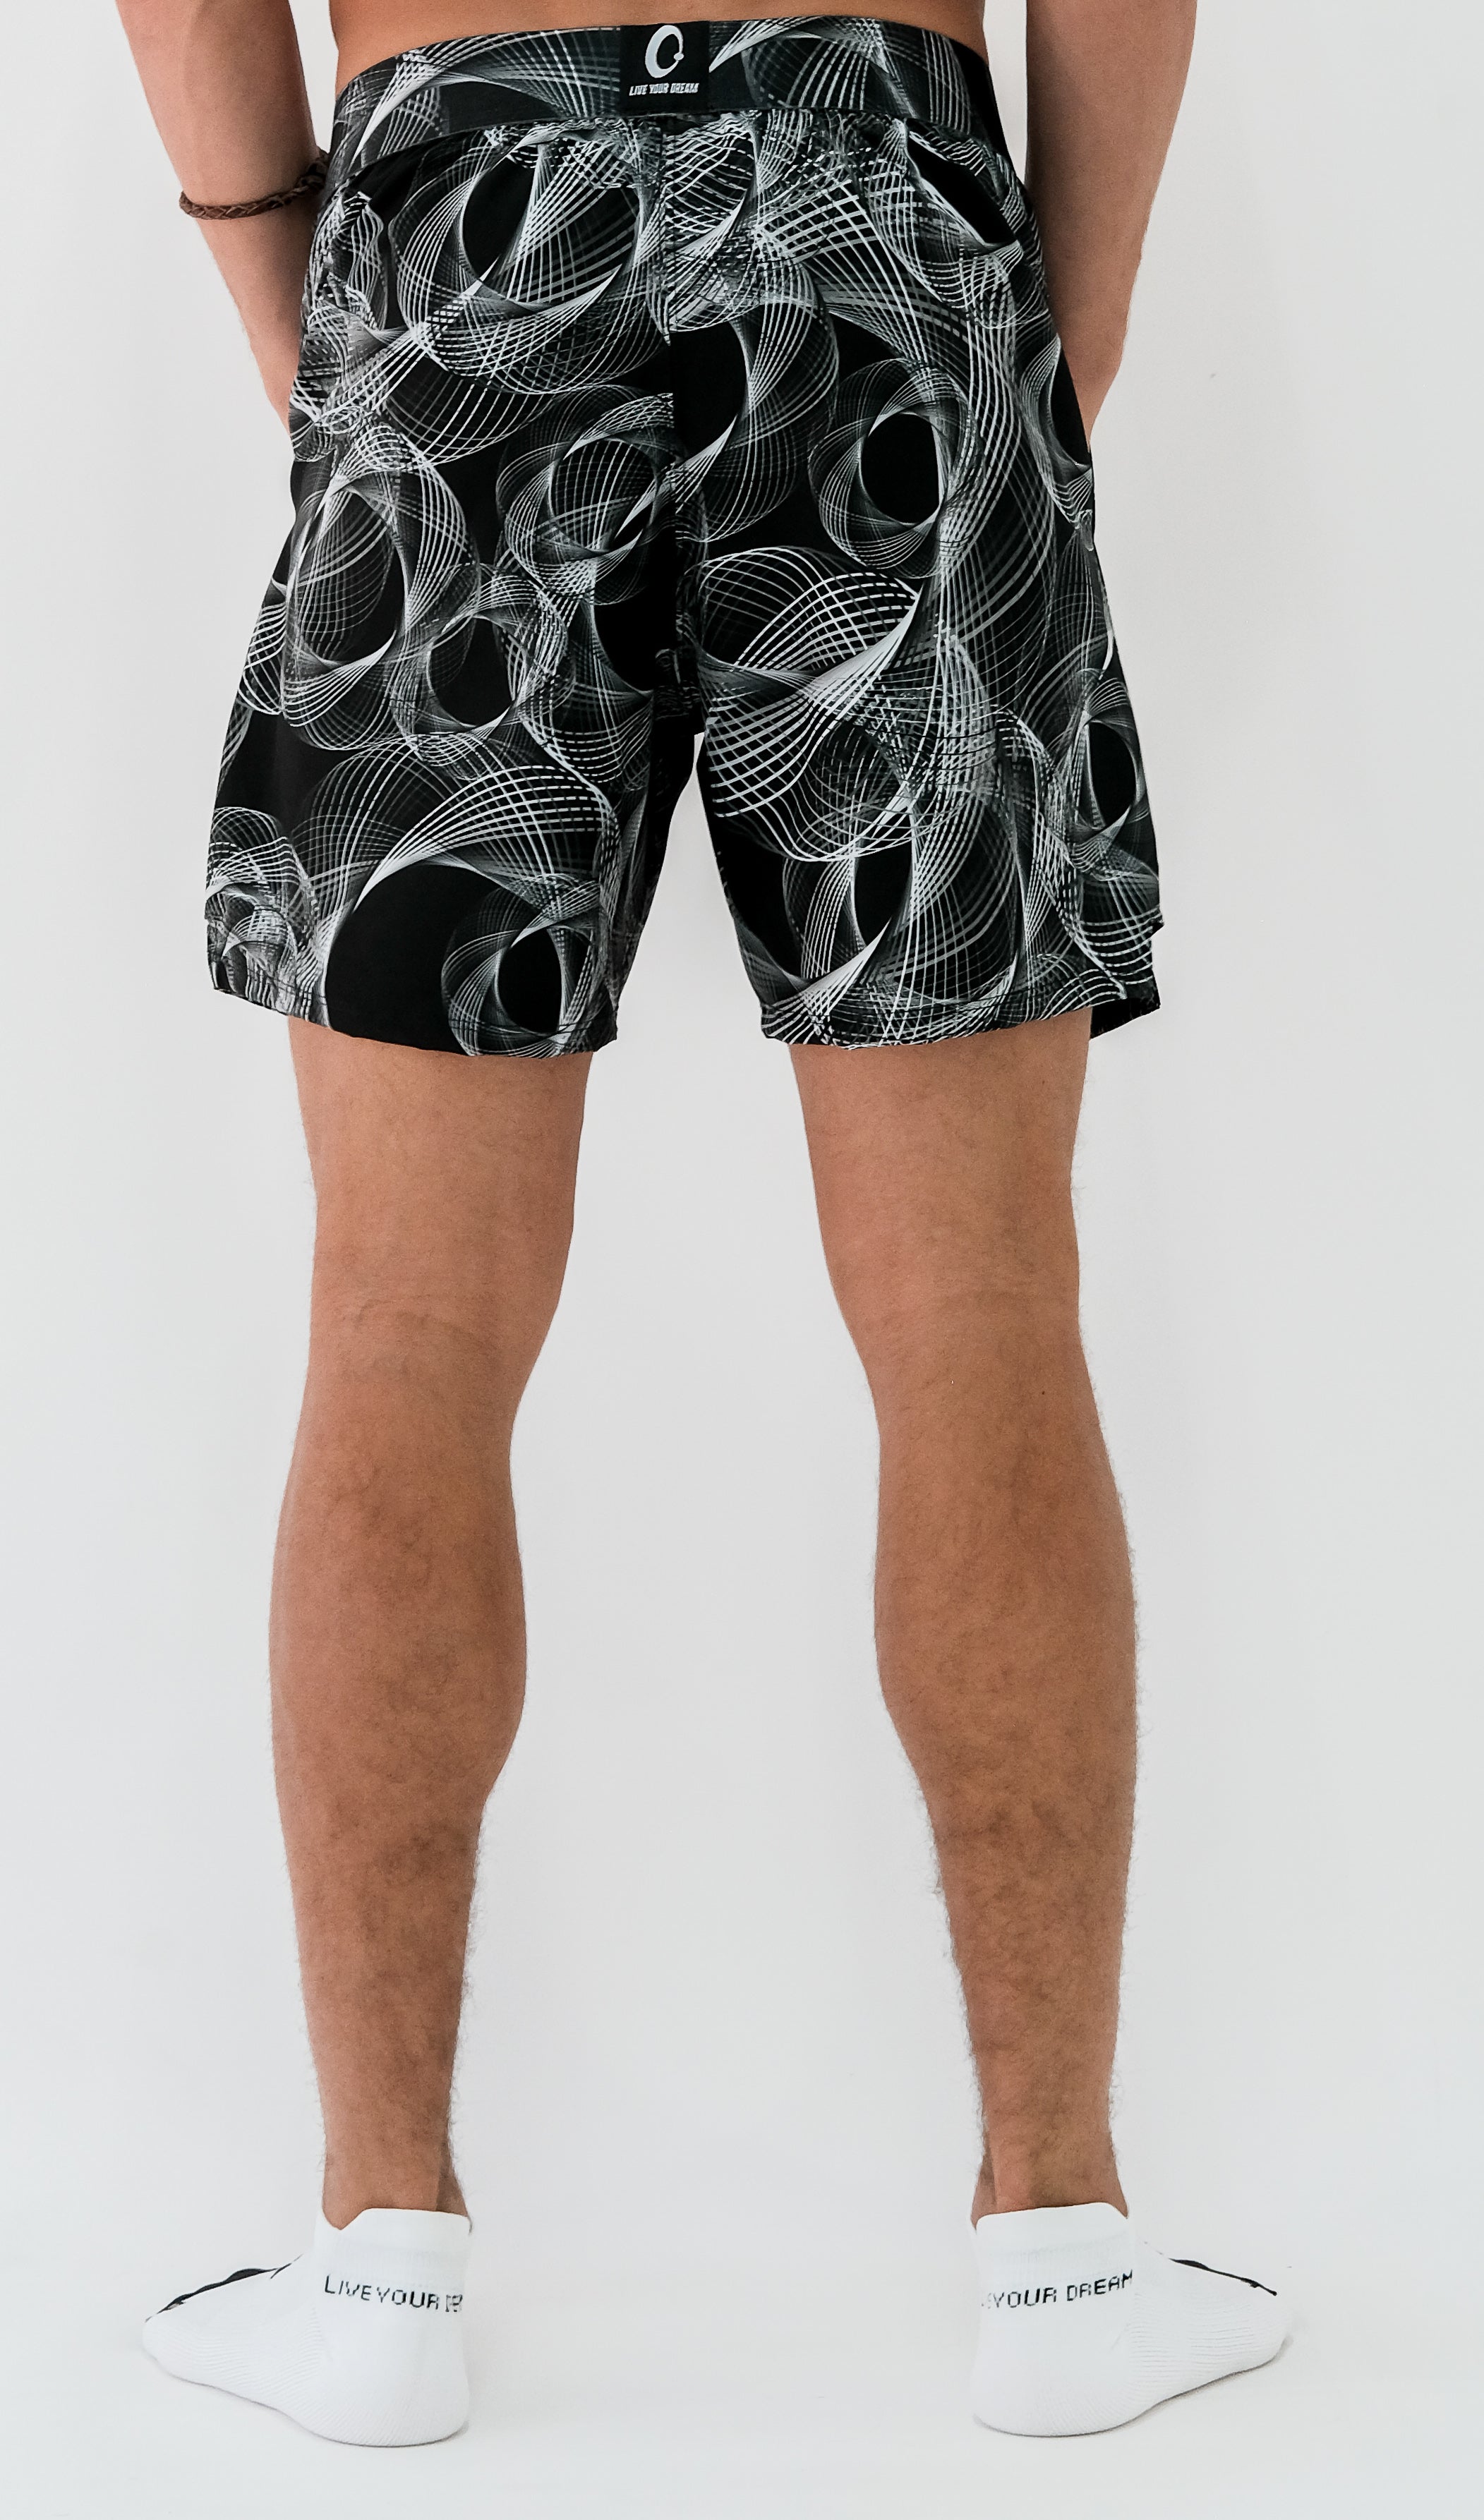 Recycled Vibrations Men's Fitness Short